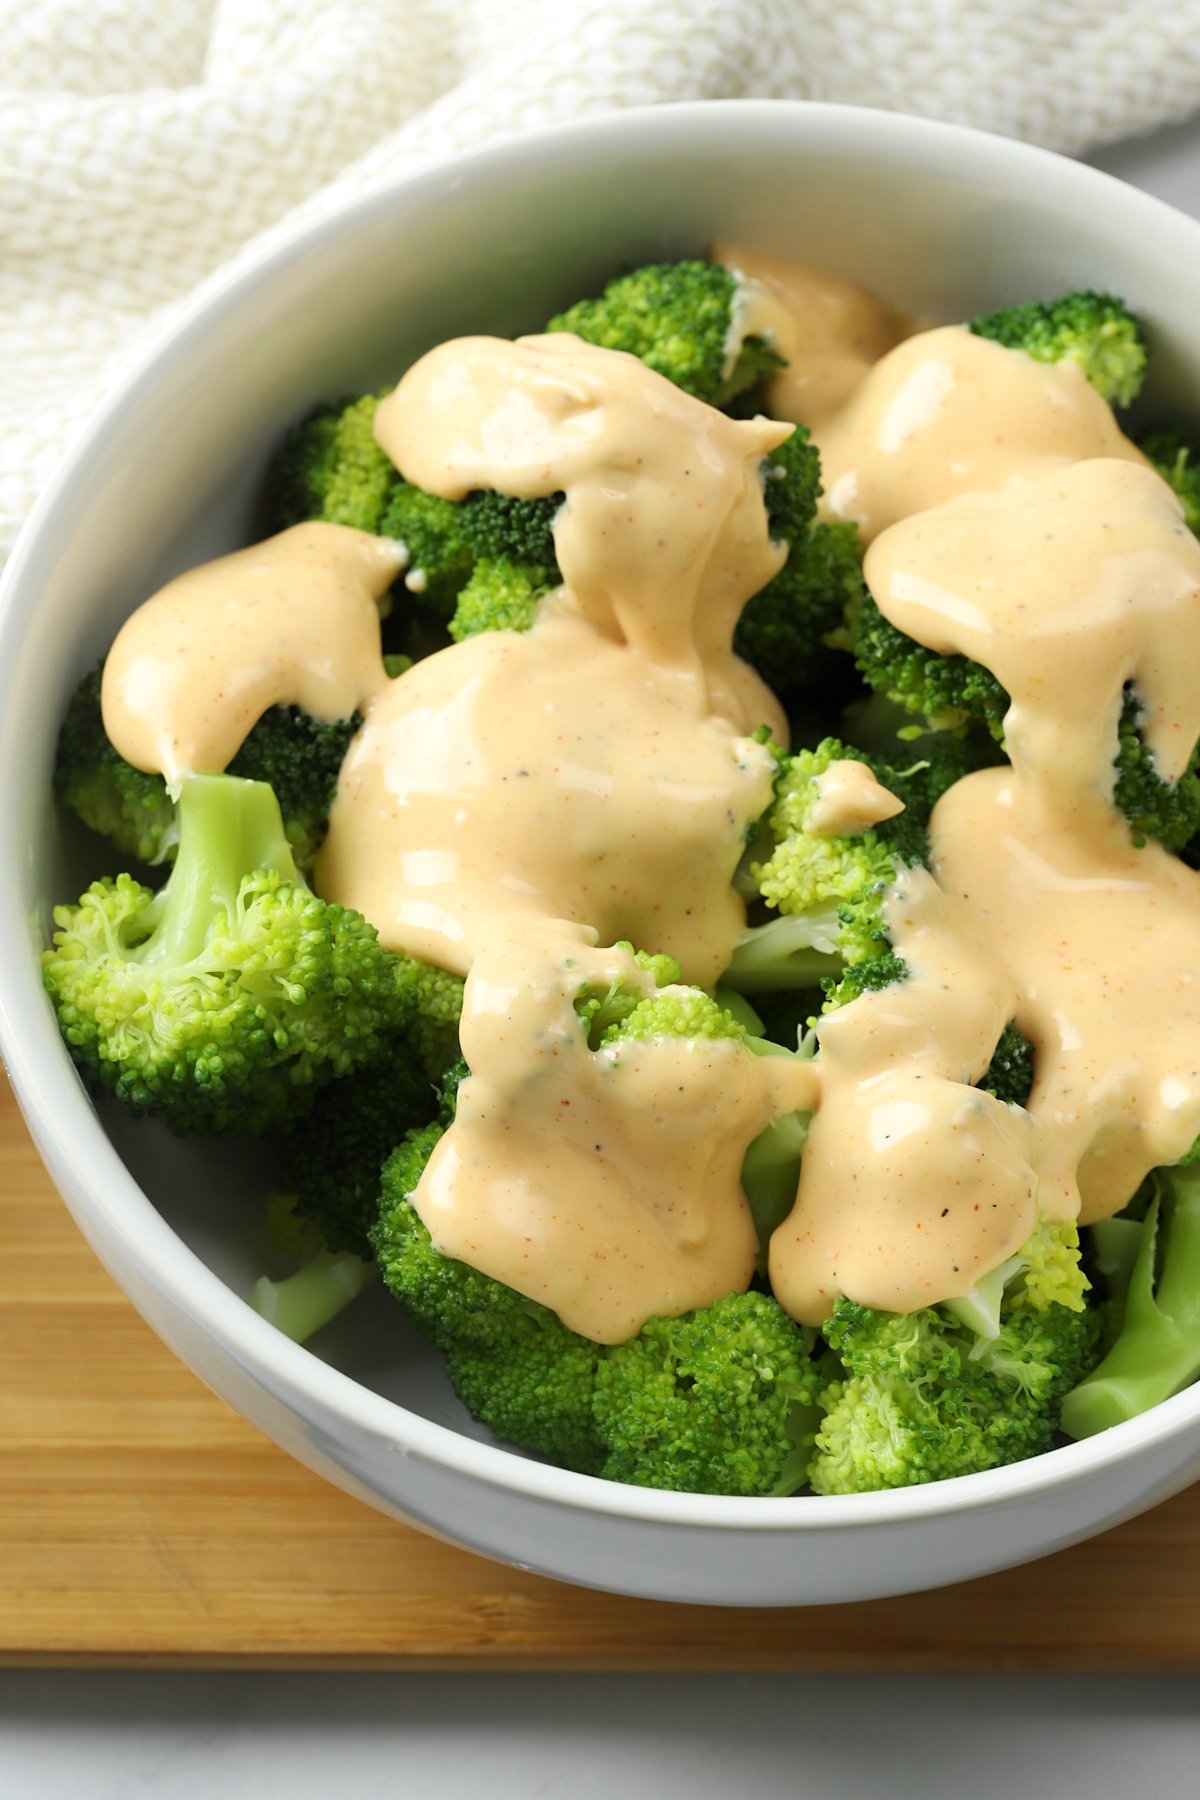 A white bowl filled with broccoli, topped with cheese sauce.